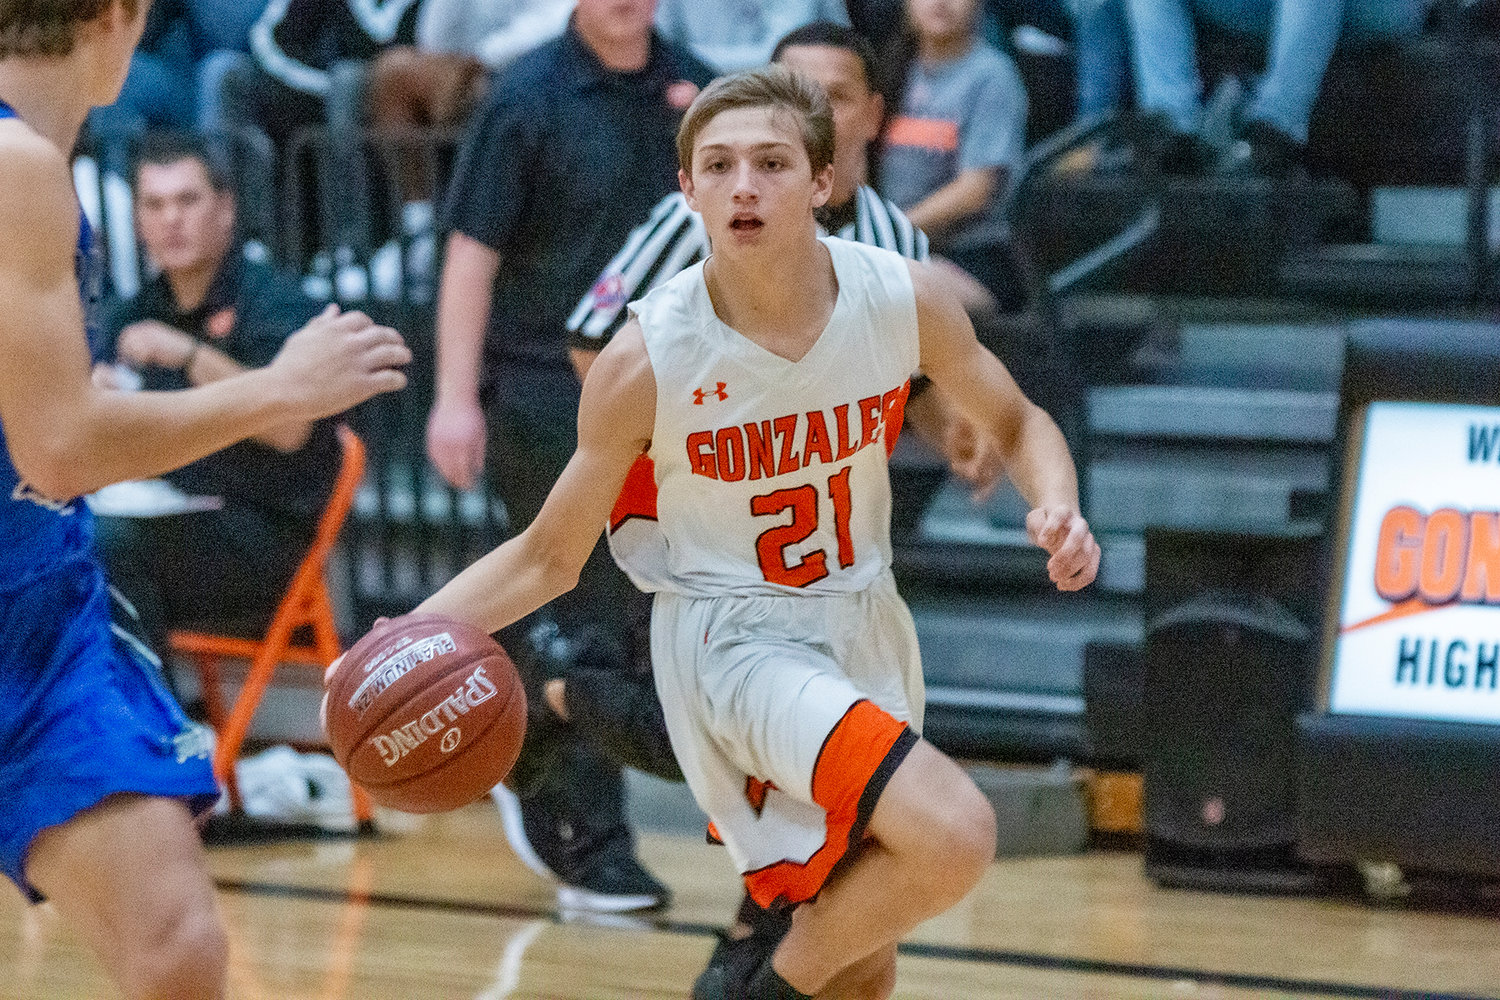 Jaydyn Lookabill (21) drives down the court in Gonzales’ 61-41 victory over Bandera at home on Tuesday. Lookabill was the team-leading scorer, coming away with 29 points in the 20-point victory.